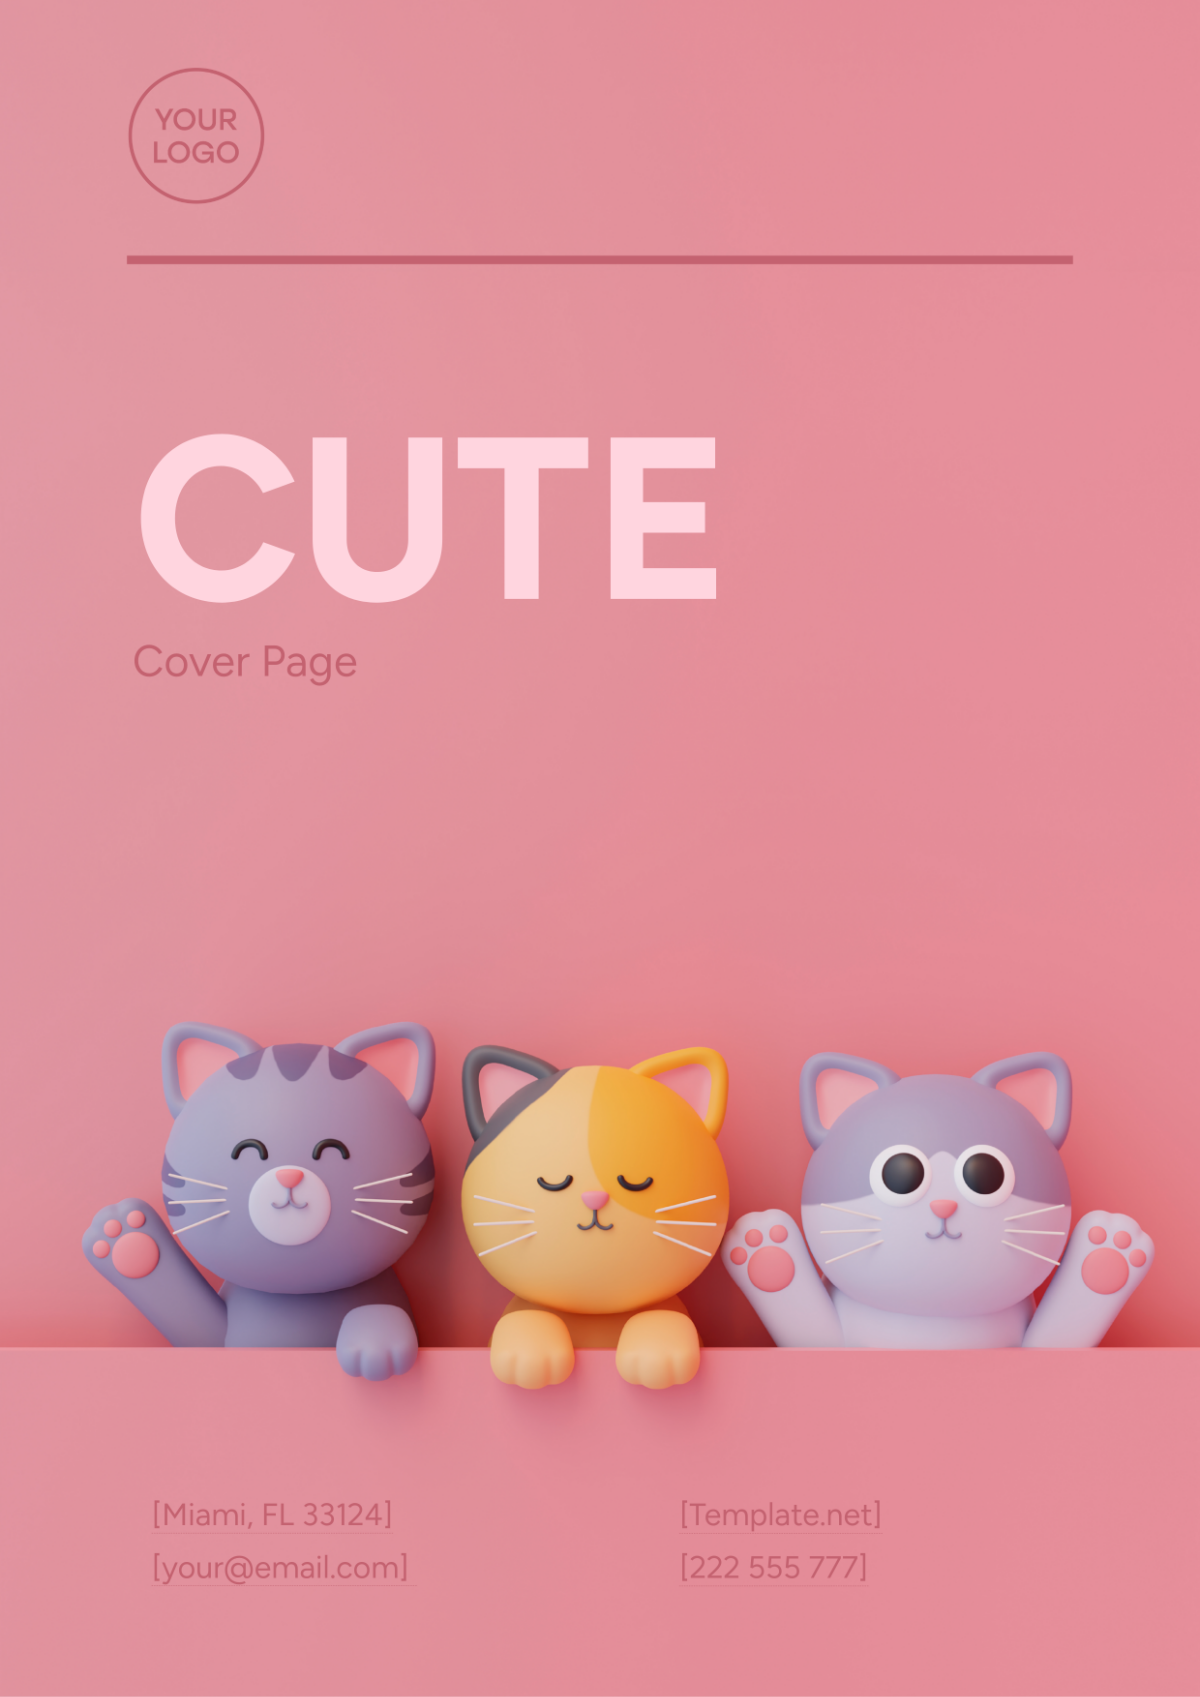 Free Cute Cover Page Image Template